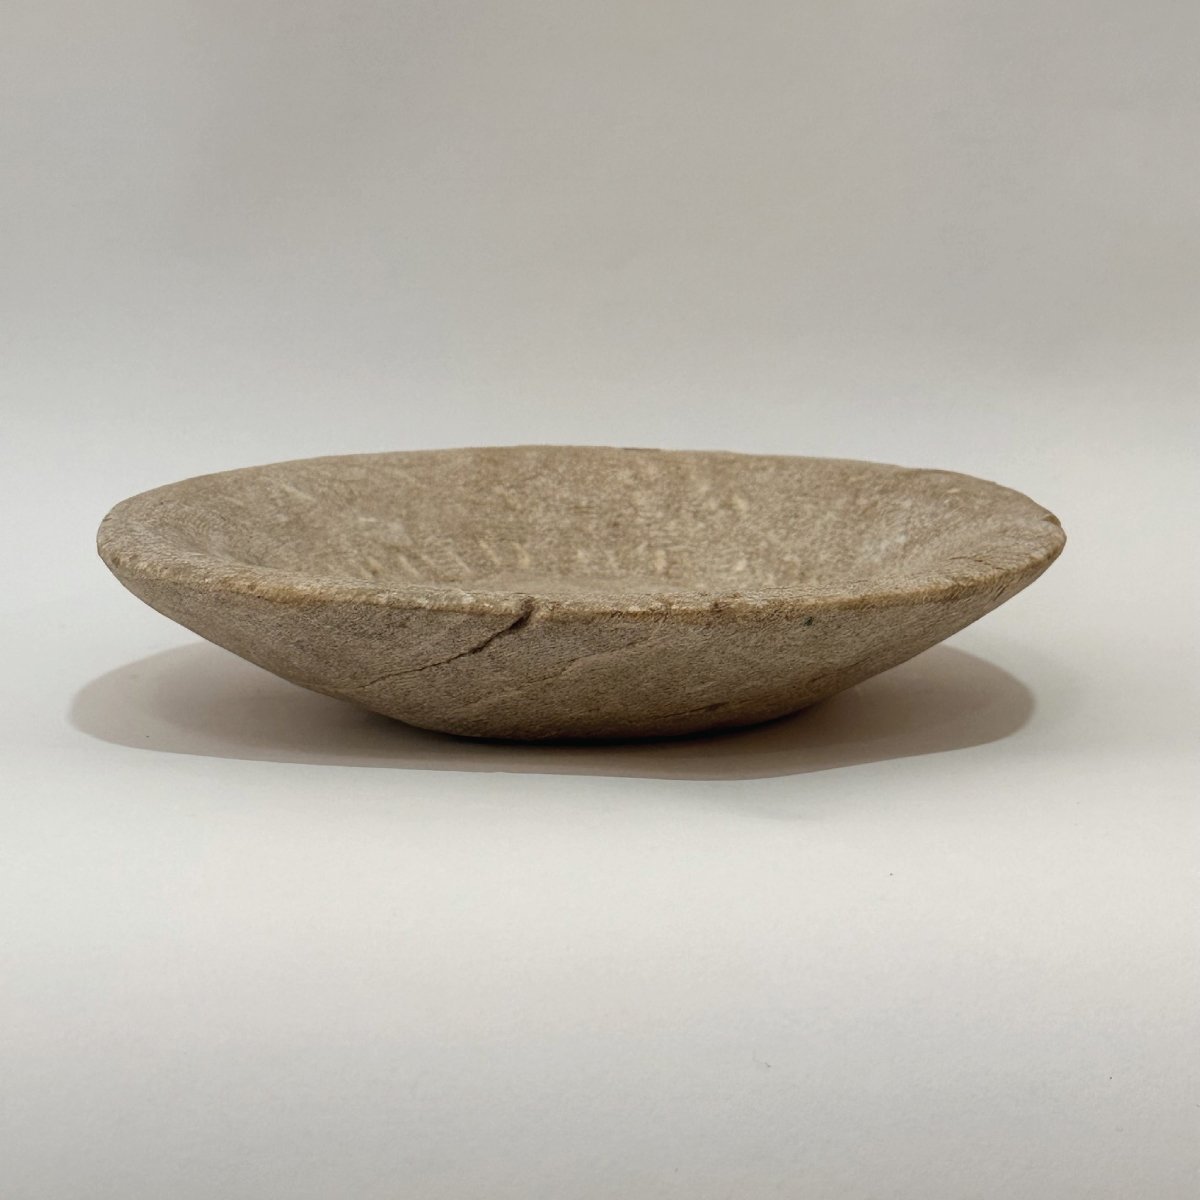 Antiqued Stone Bowl - Tan - SpaceHavenHome